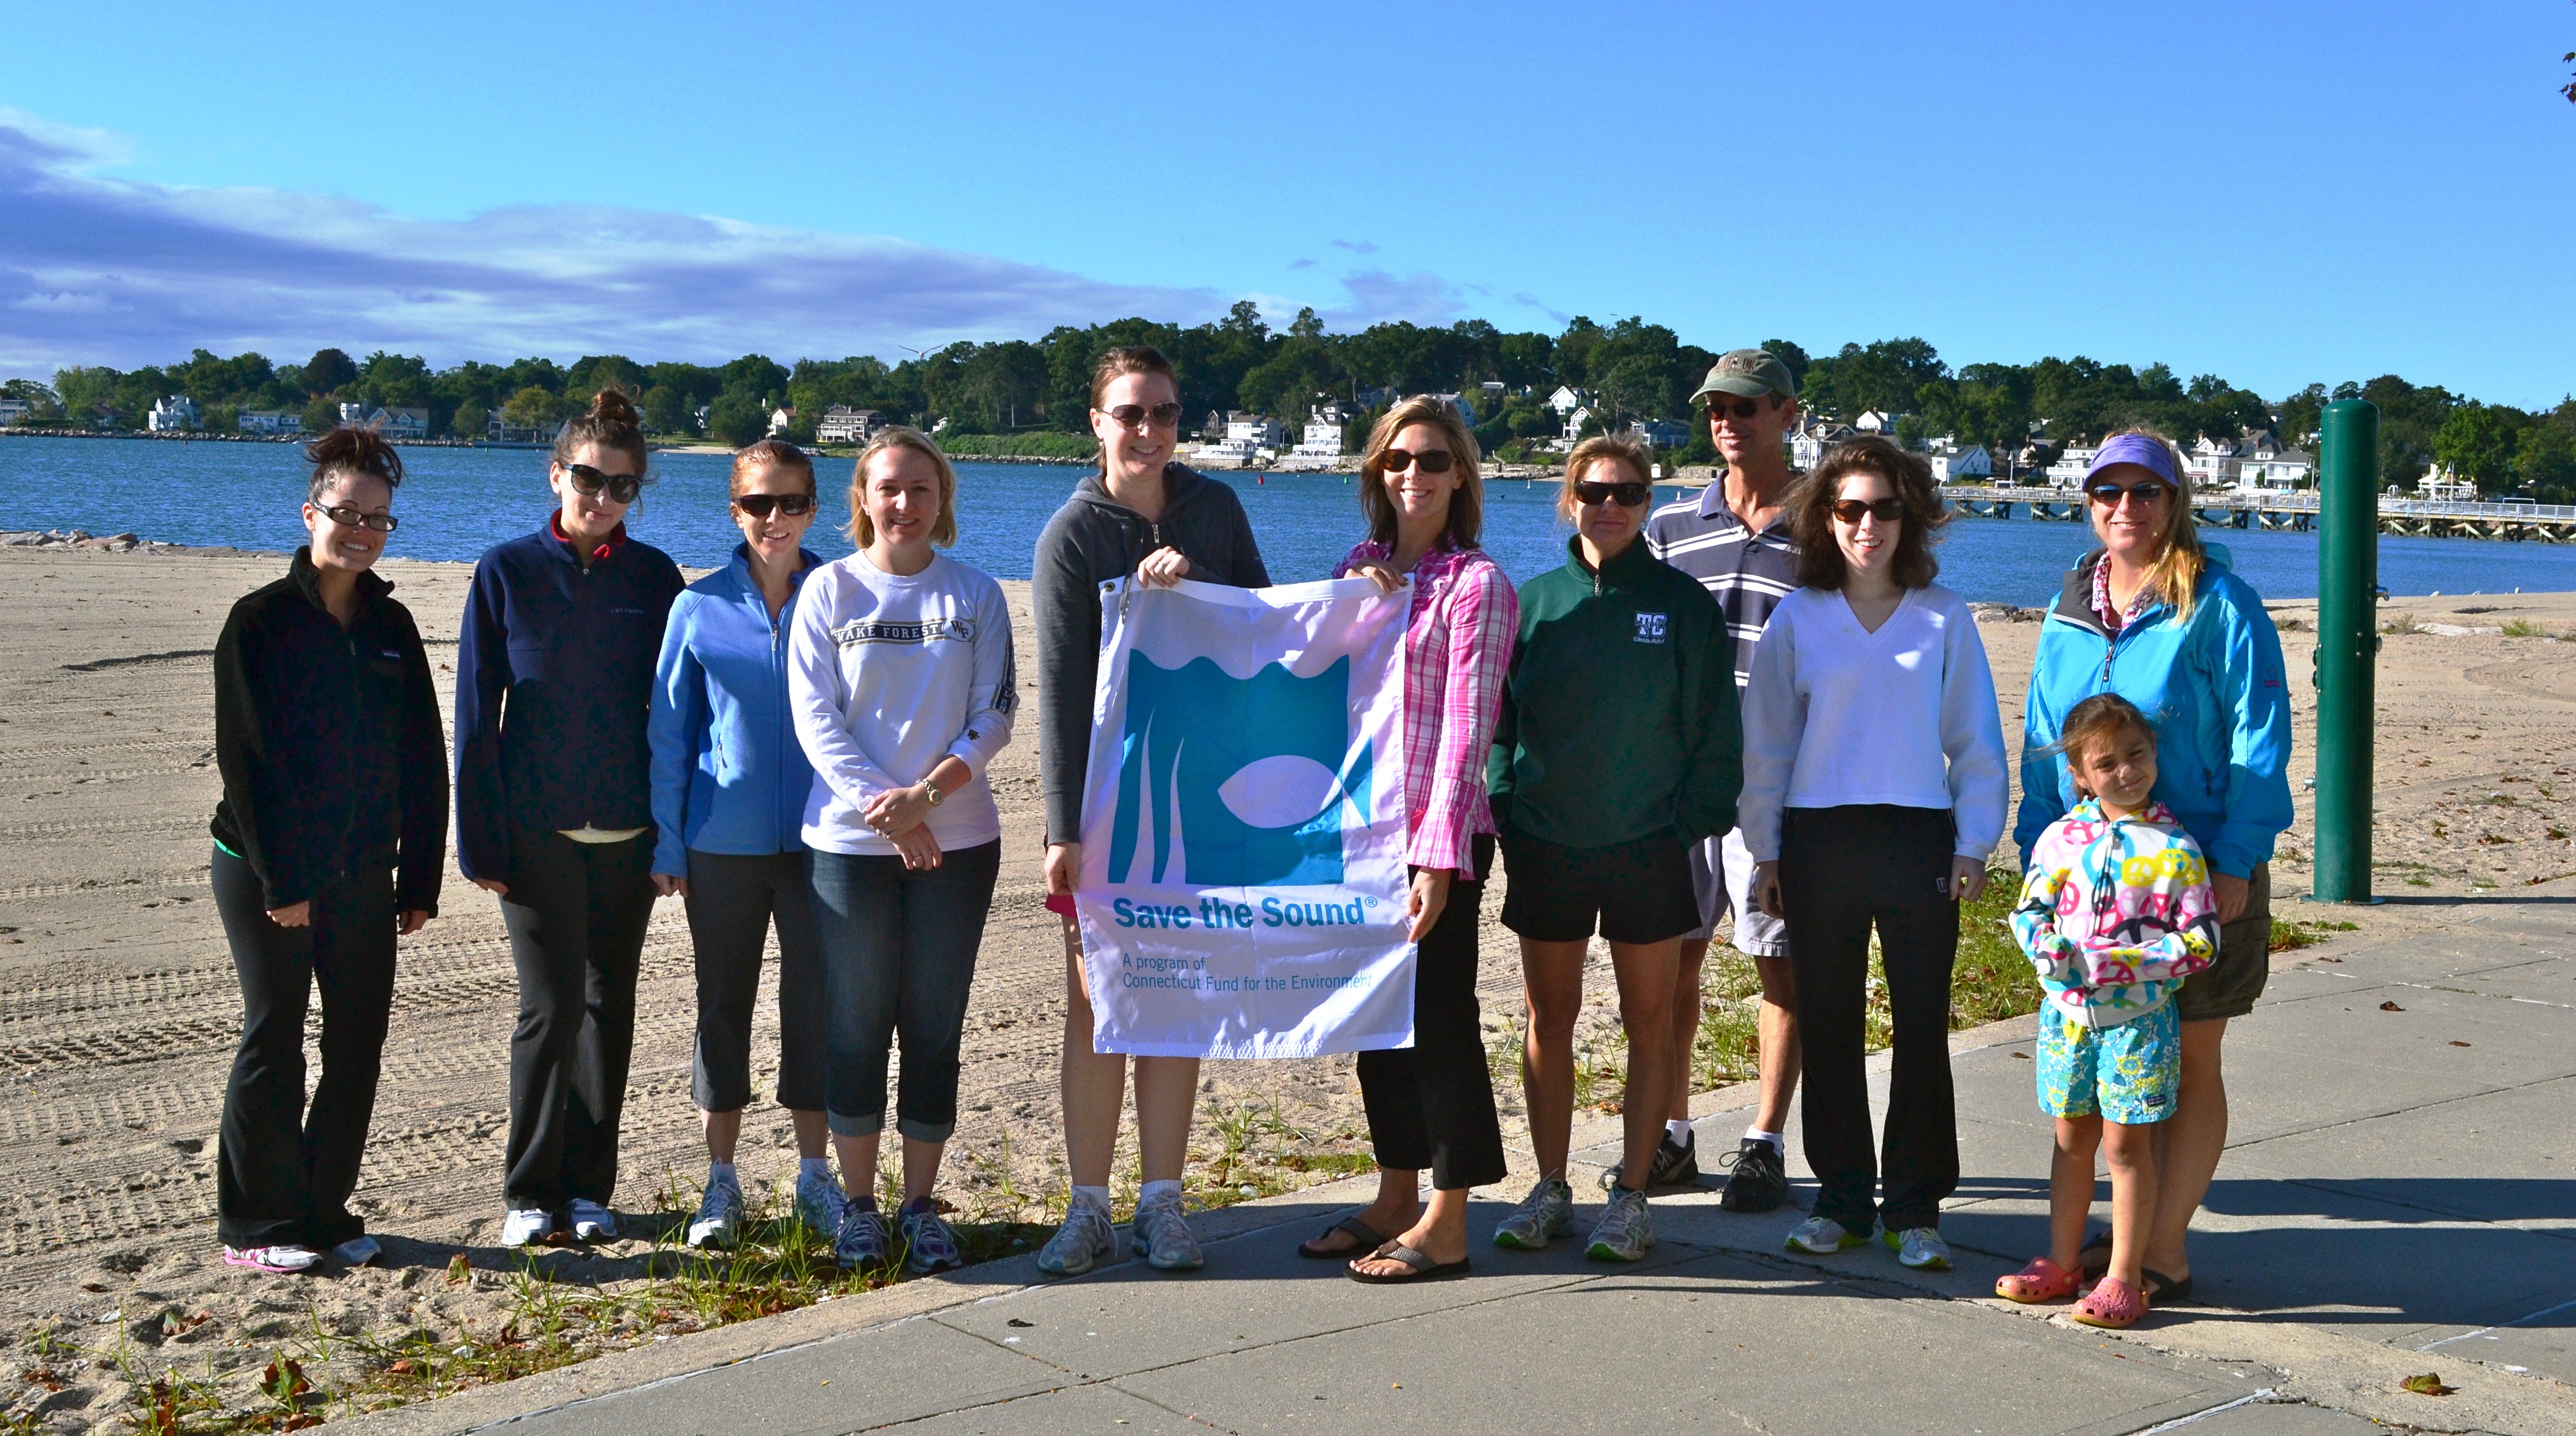 Cleanup of Cummings Beach in Stamford for ICC